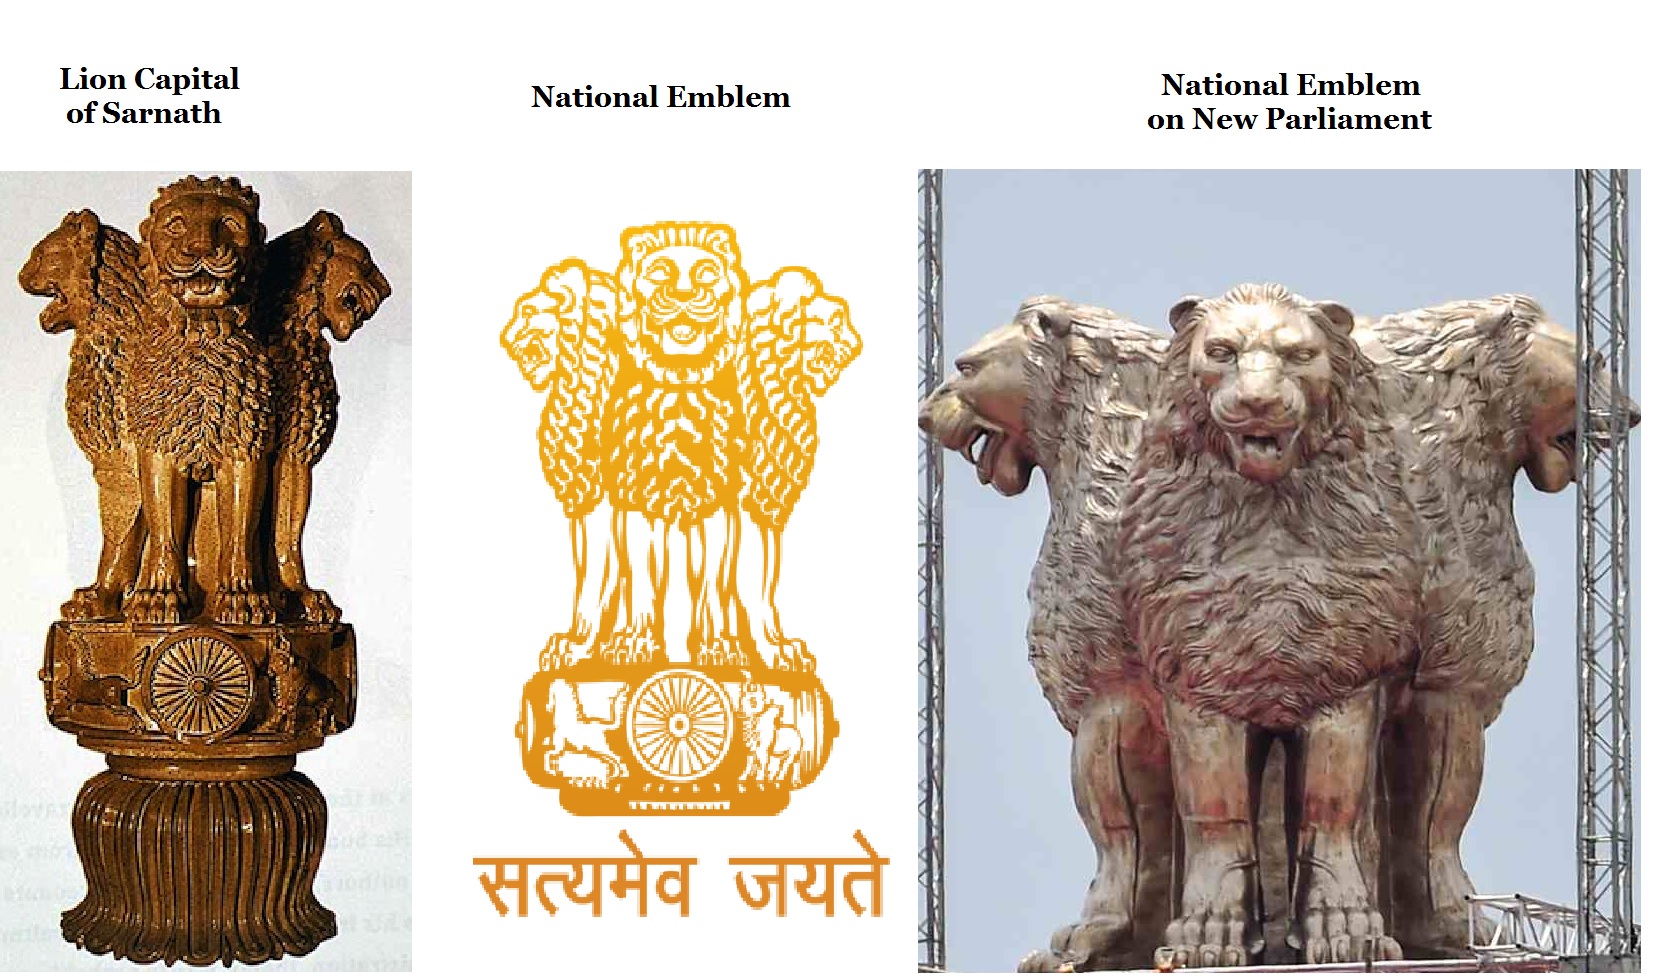 Outrage over new 'National Emblem' | Current Affairs